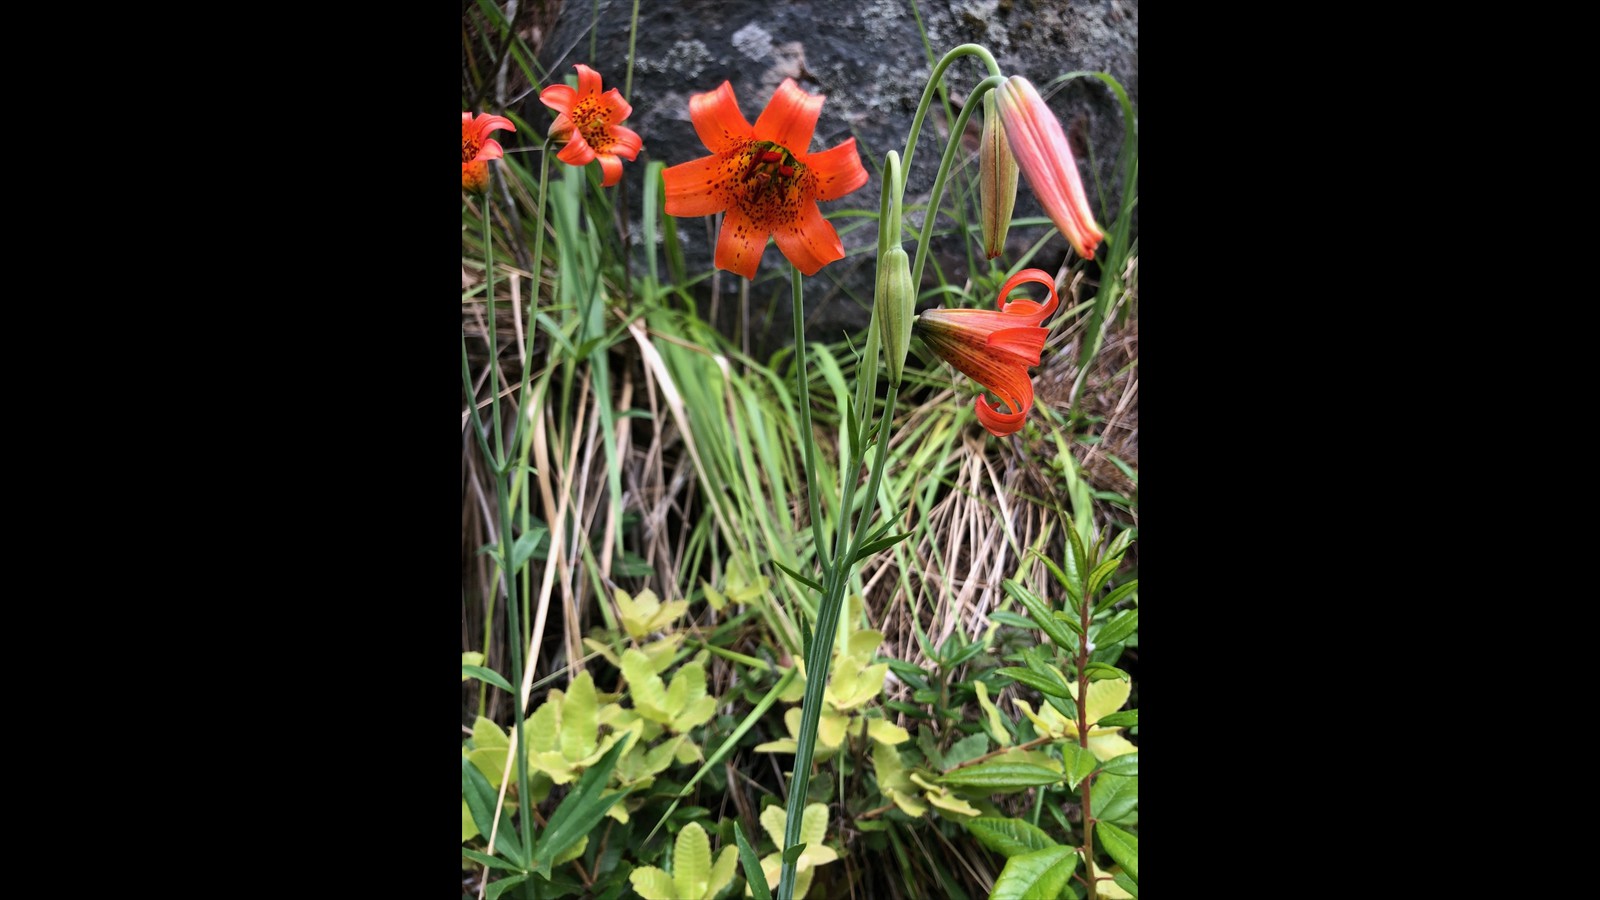 Coast Lilies at Salt Point State Park by Susan Rudy